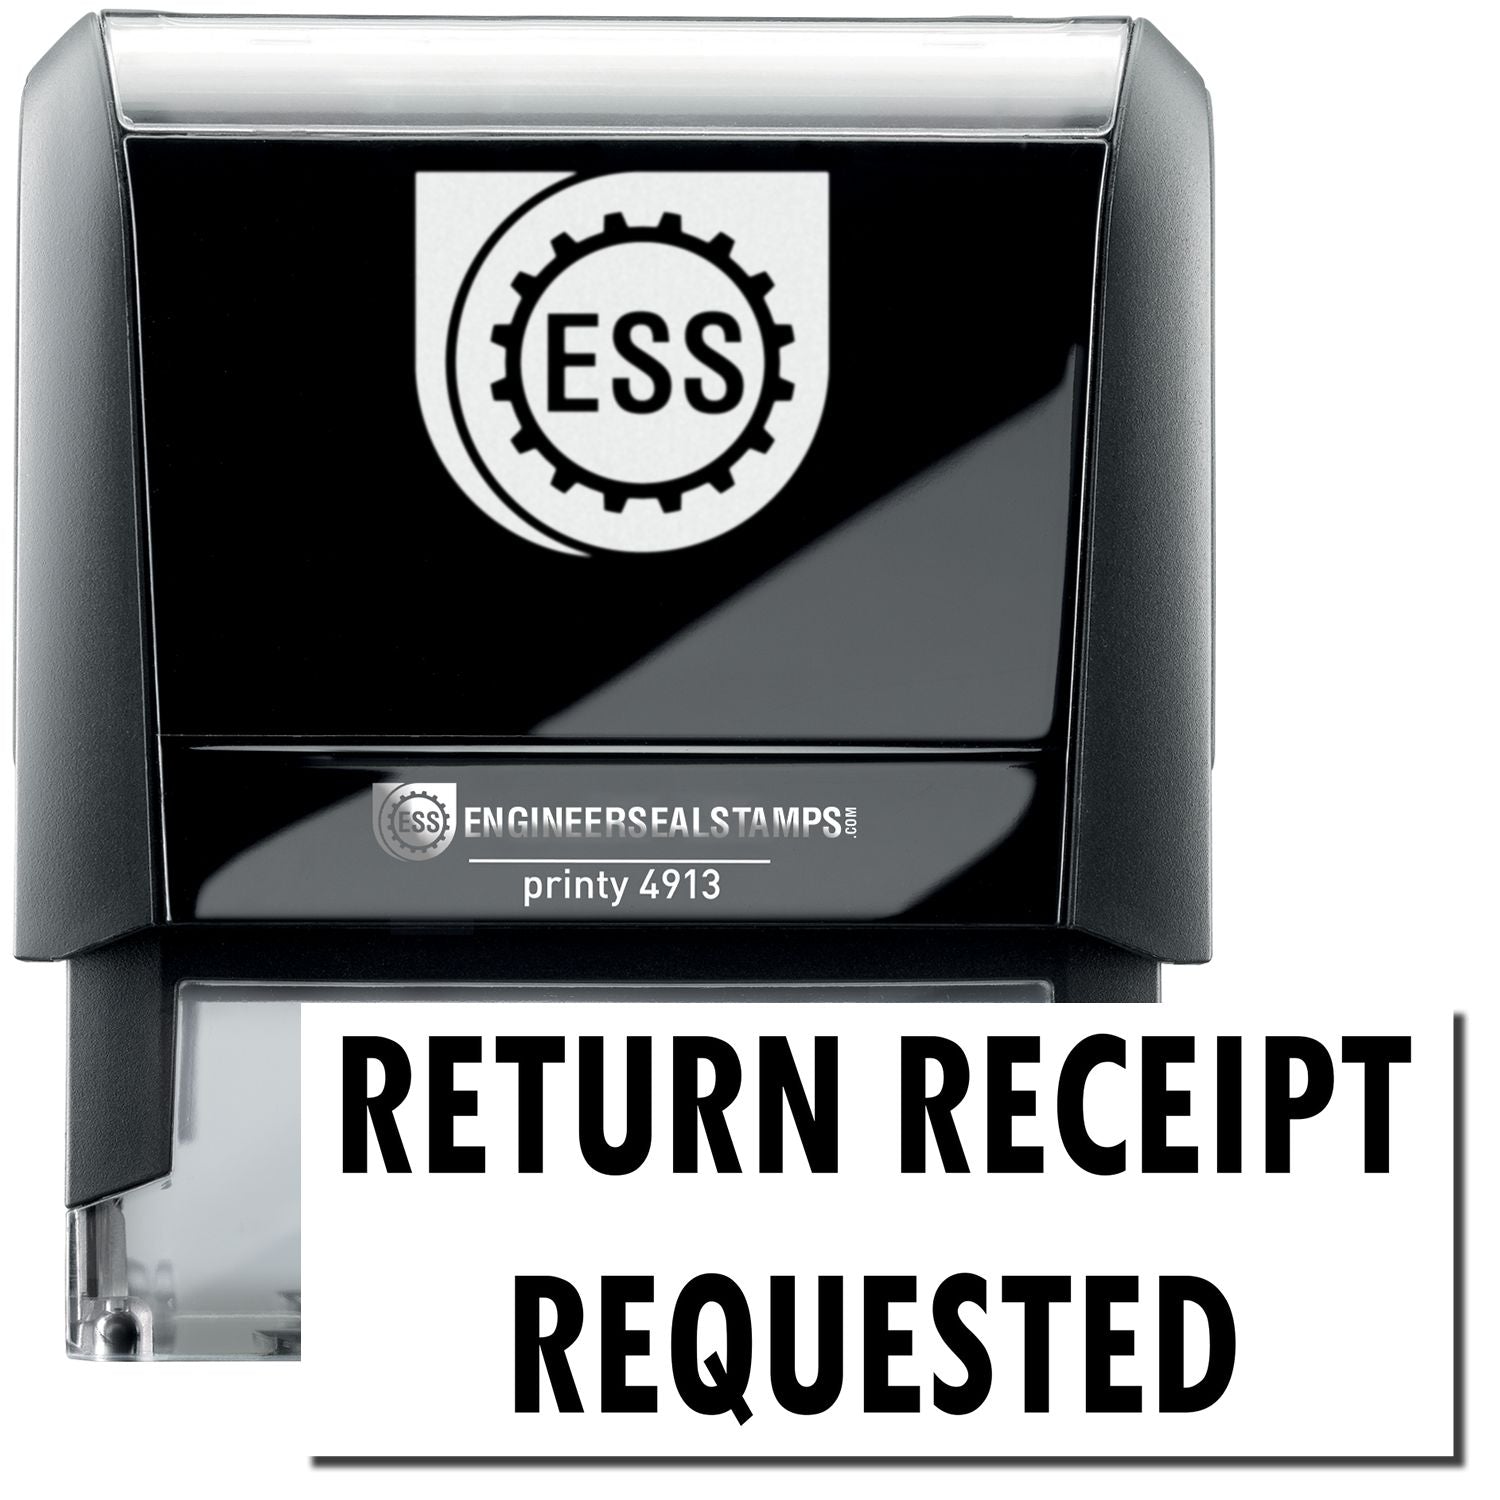 A self-inking stamp with a stamped image showing how the text "RETURN RECEIPT REQUESTED" in a large bold font is displayed by it.